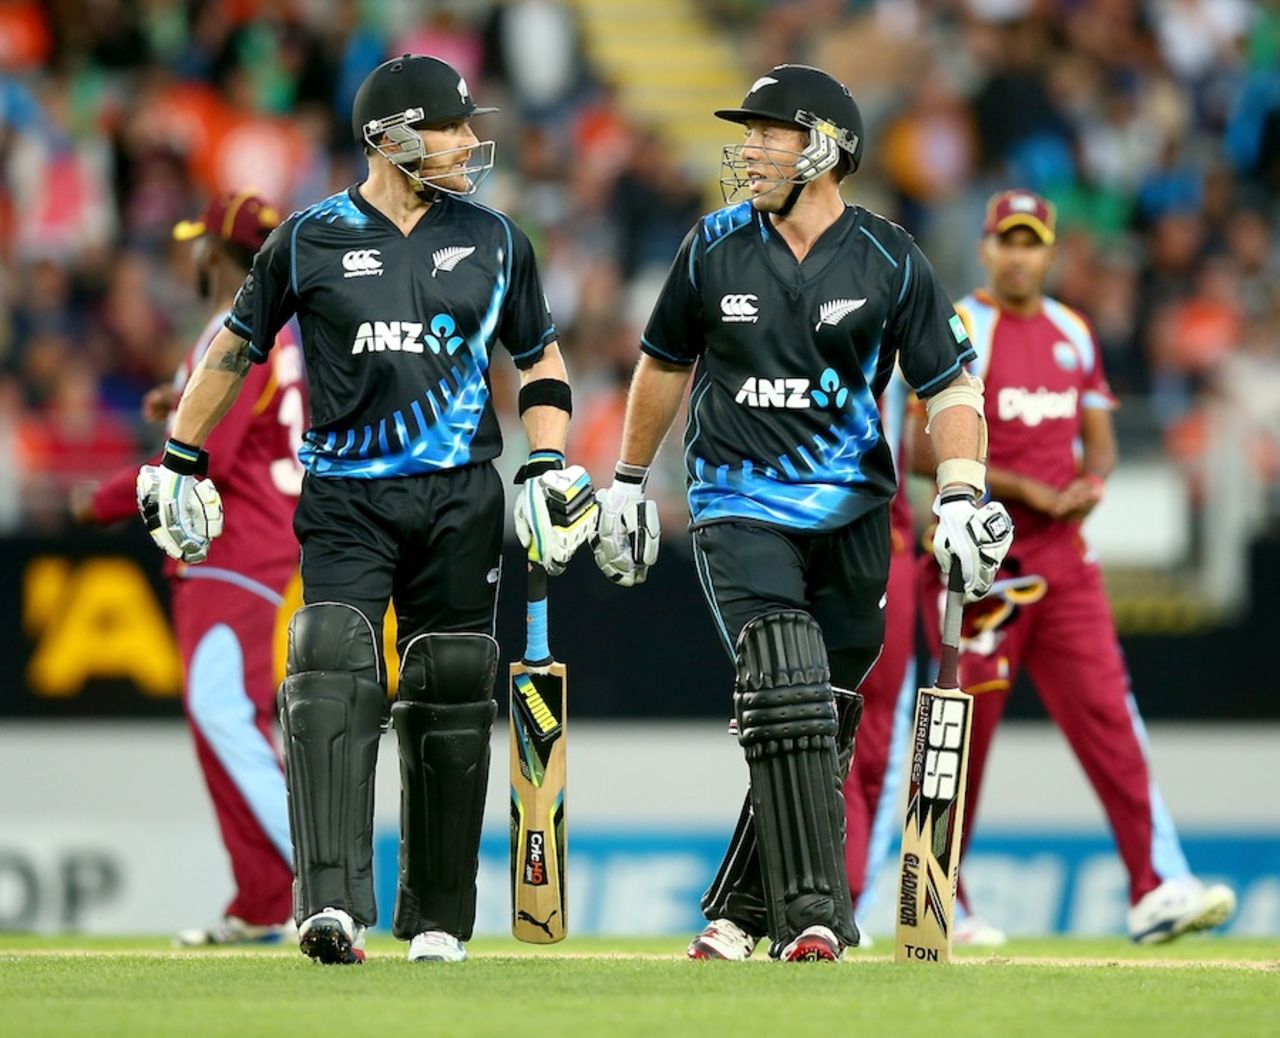 Brendon McCullum and Luke Ronchi walk back after their stand of 85, New Zealand v West Indies, 1st T20, Auckland, January 11, 2014